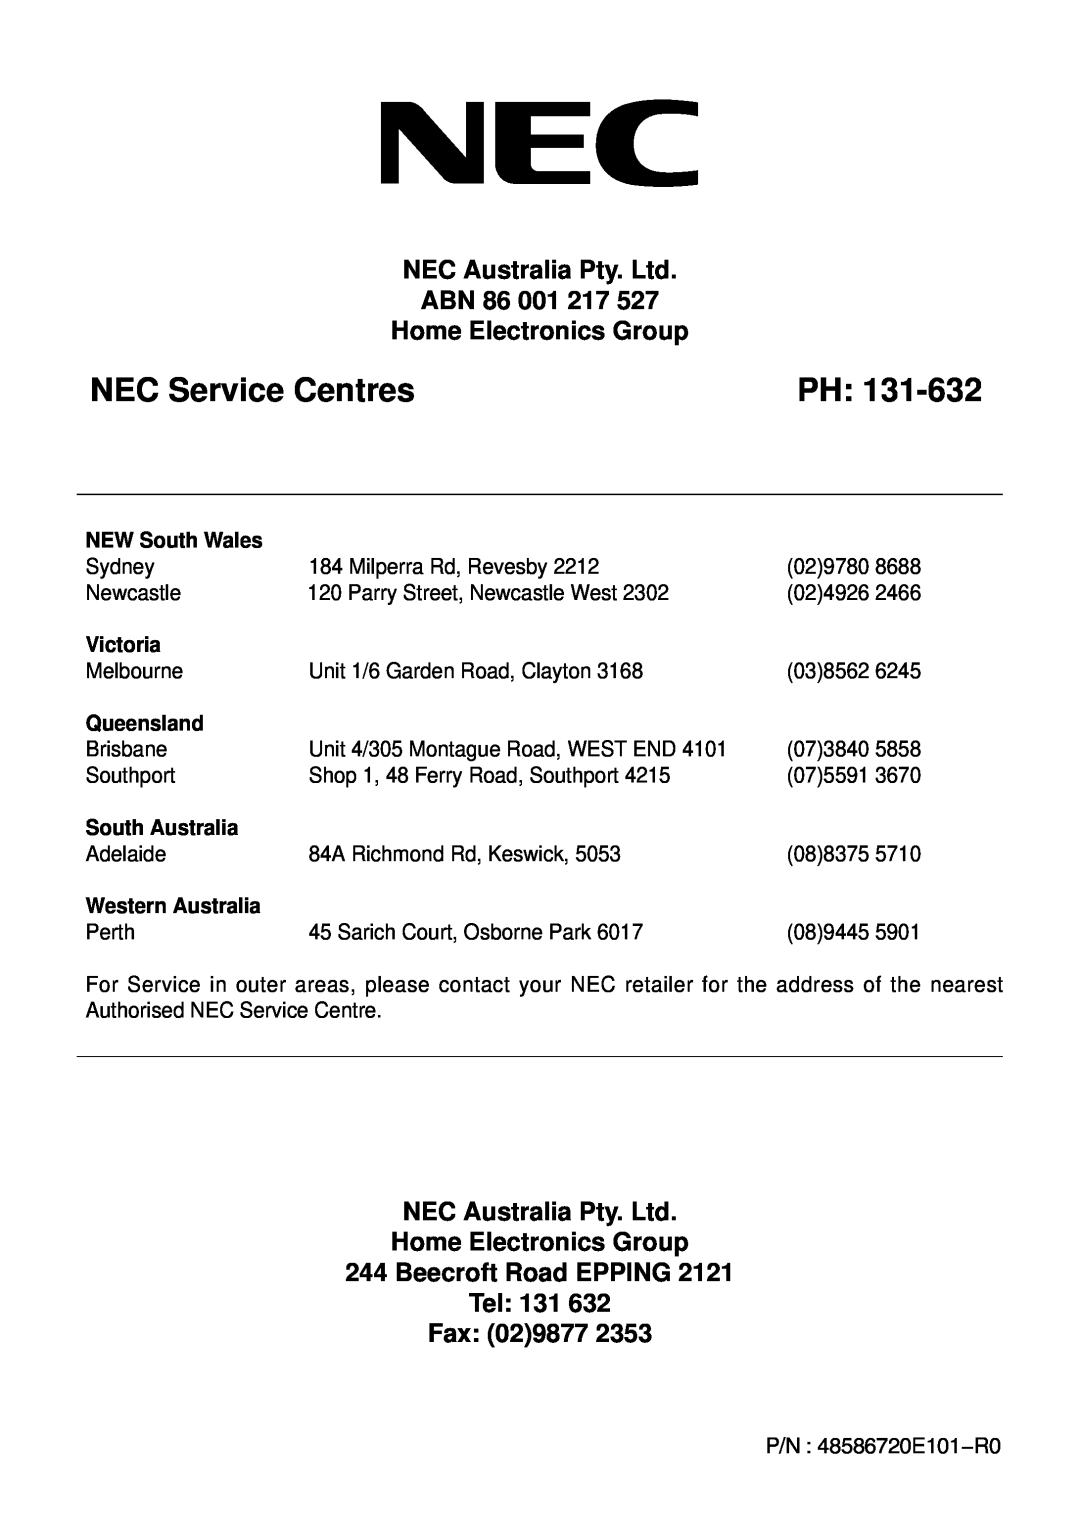 NEC PF32WT100 ABN 86 001 217 Home Electronics Group, Home Electronics Group 244 Beecroft Road EPPING Tel 131 Fax 029877 